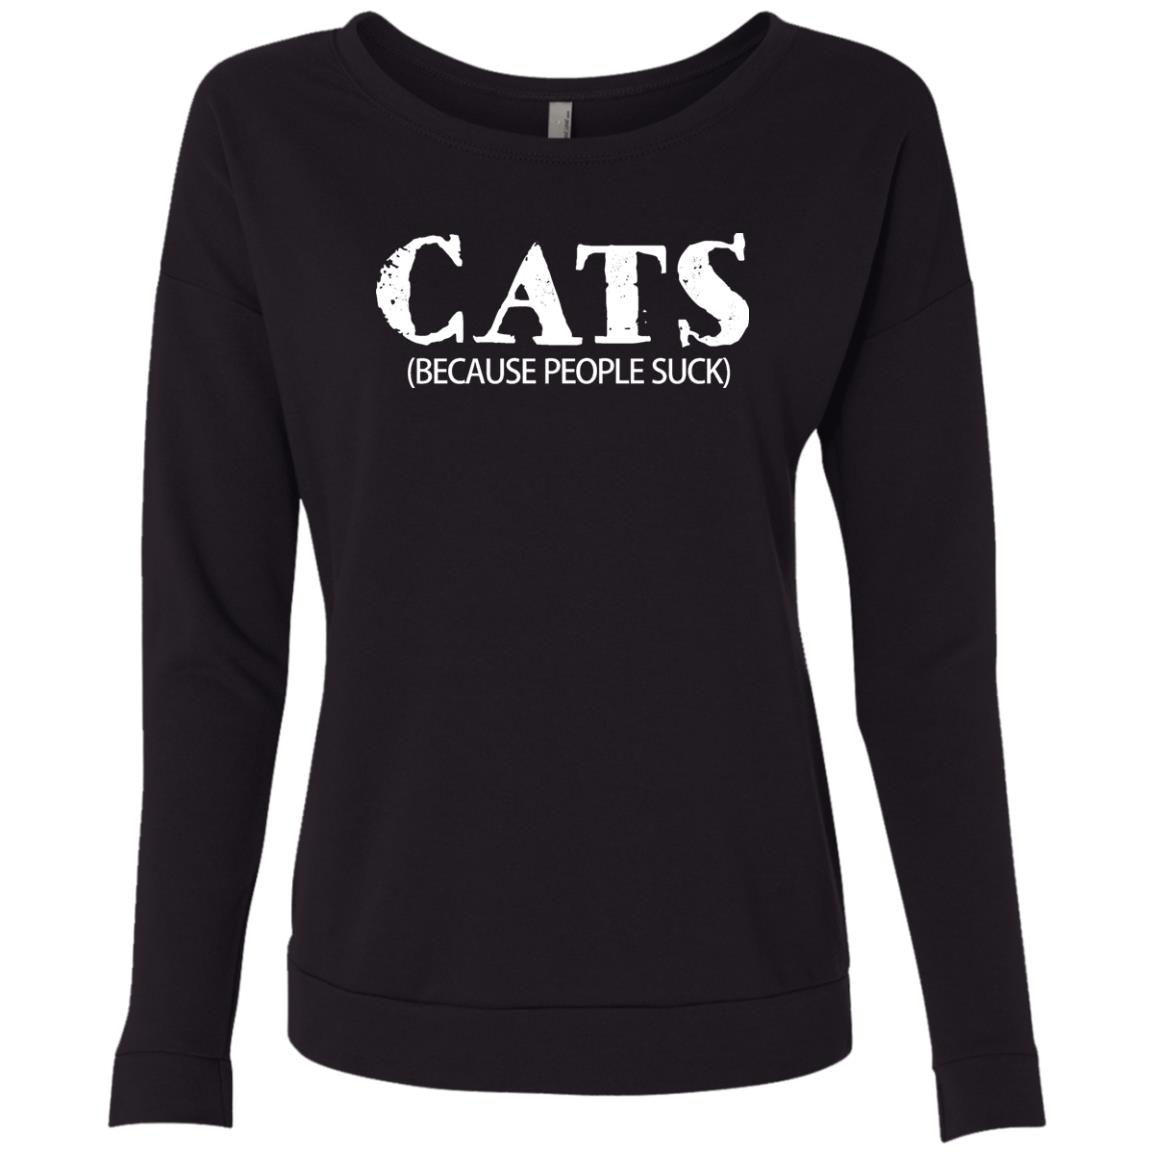 Cats: Because People Suck Flowy Tank - iHeartCats.com